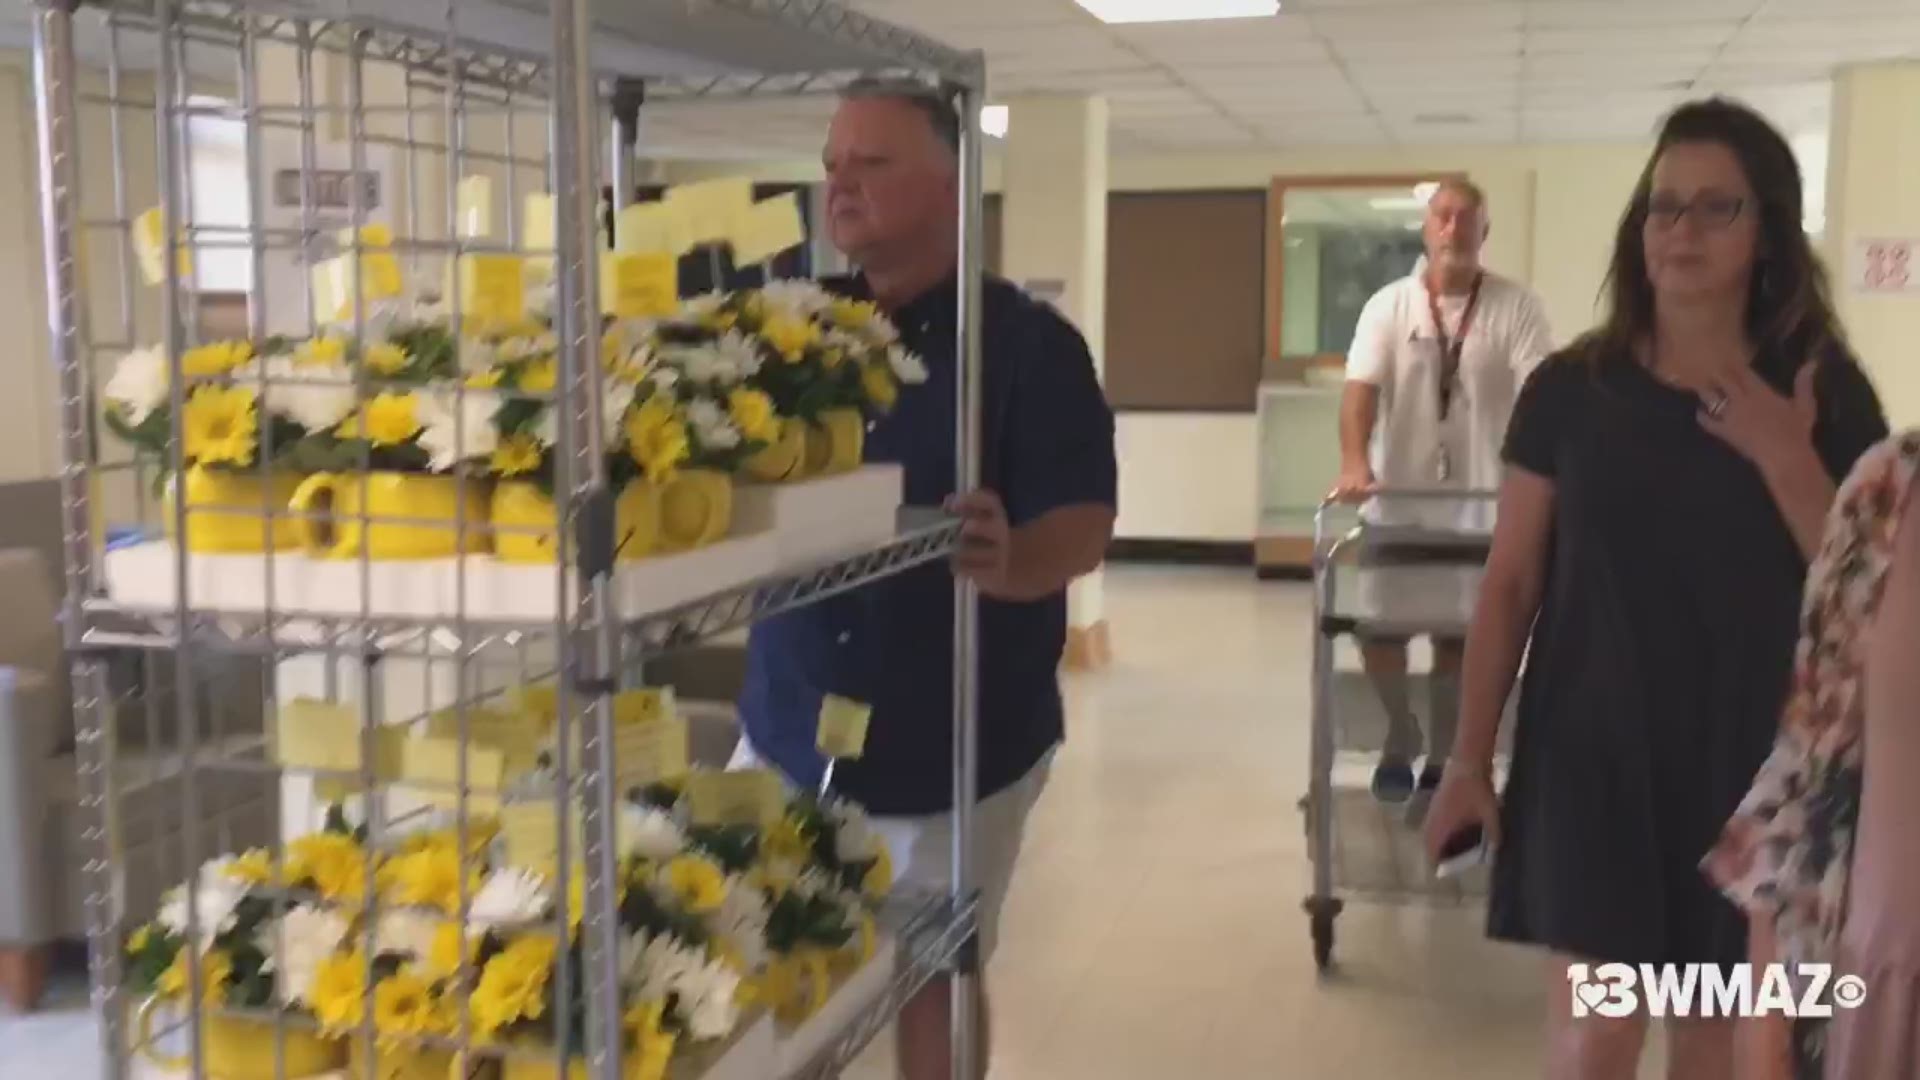 Randy Stone of Classic Florist and Home Decor took the time to make over 200 veterans at the Carl Vinson VA Medical Center feel special Wednesday by giving them flowers.